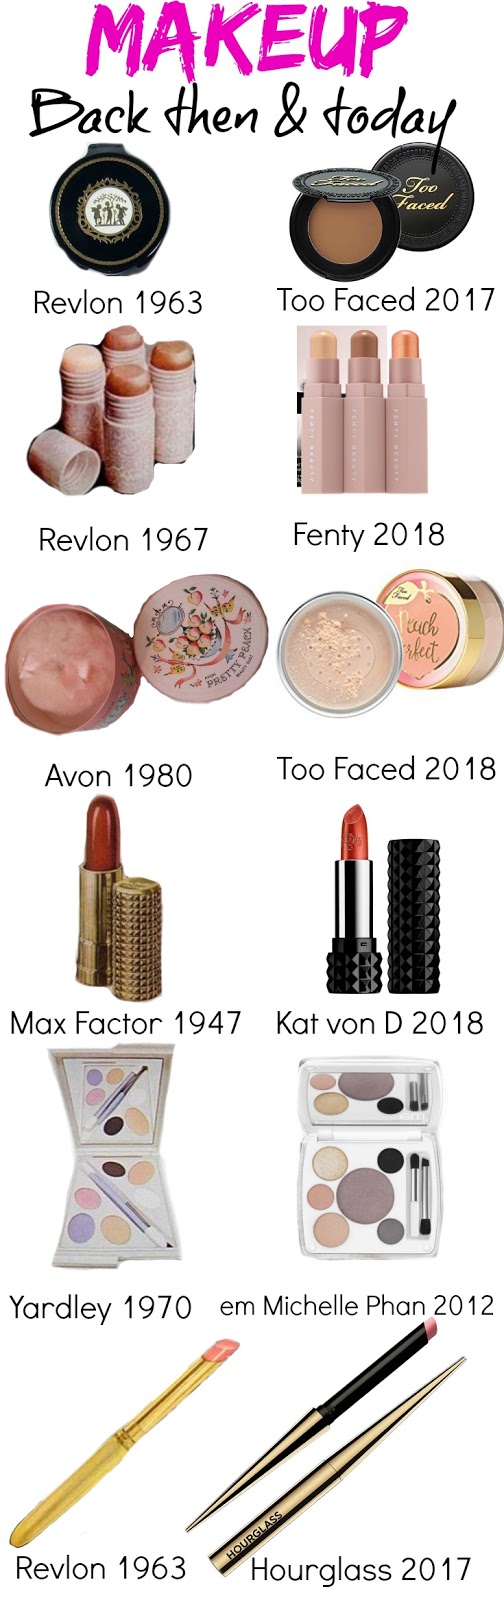 How Makeup has NOT changed through the years!